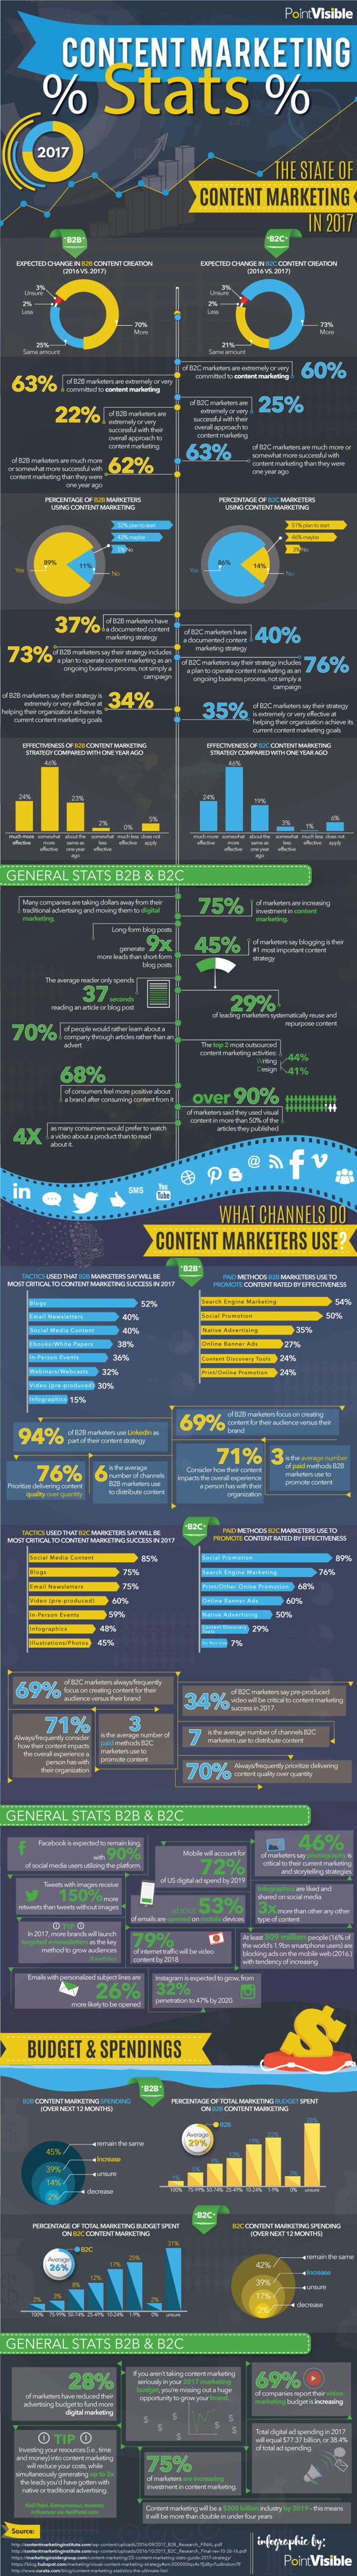 170523-infographic-content-marketing-statistics-and-trends-full